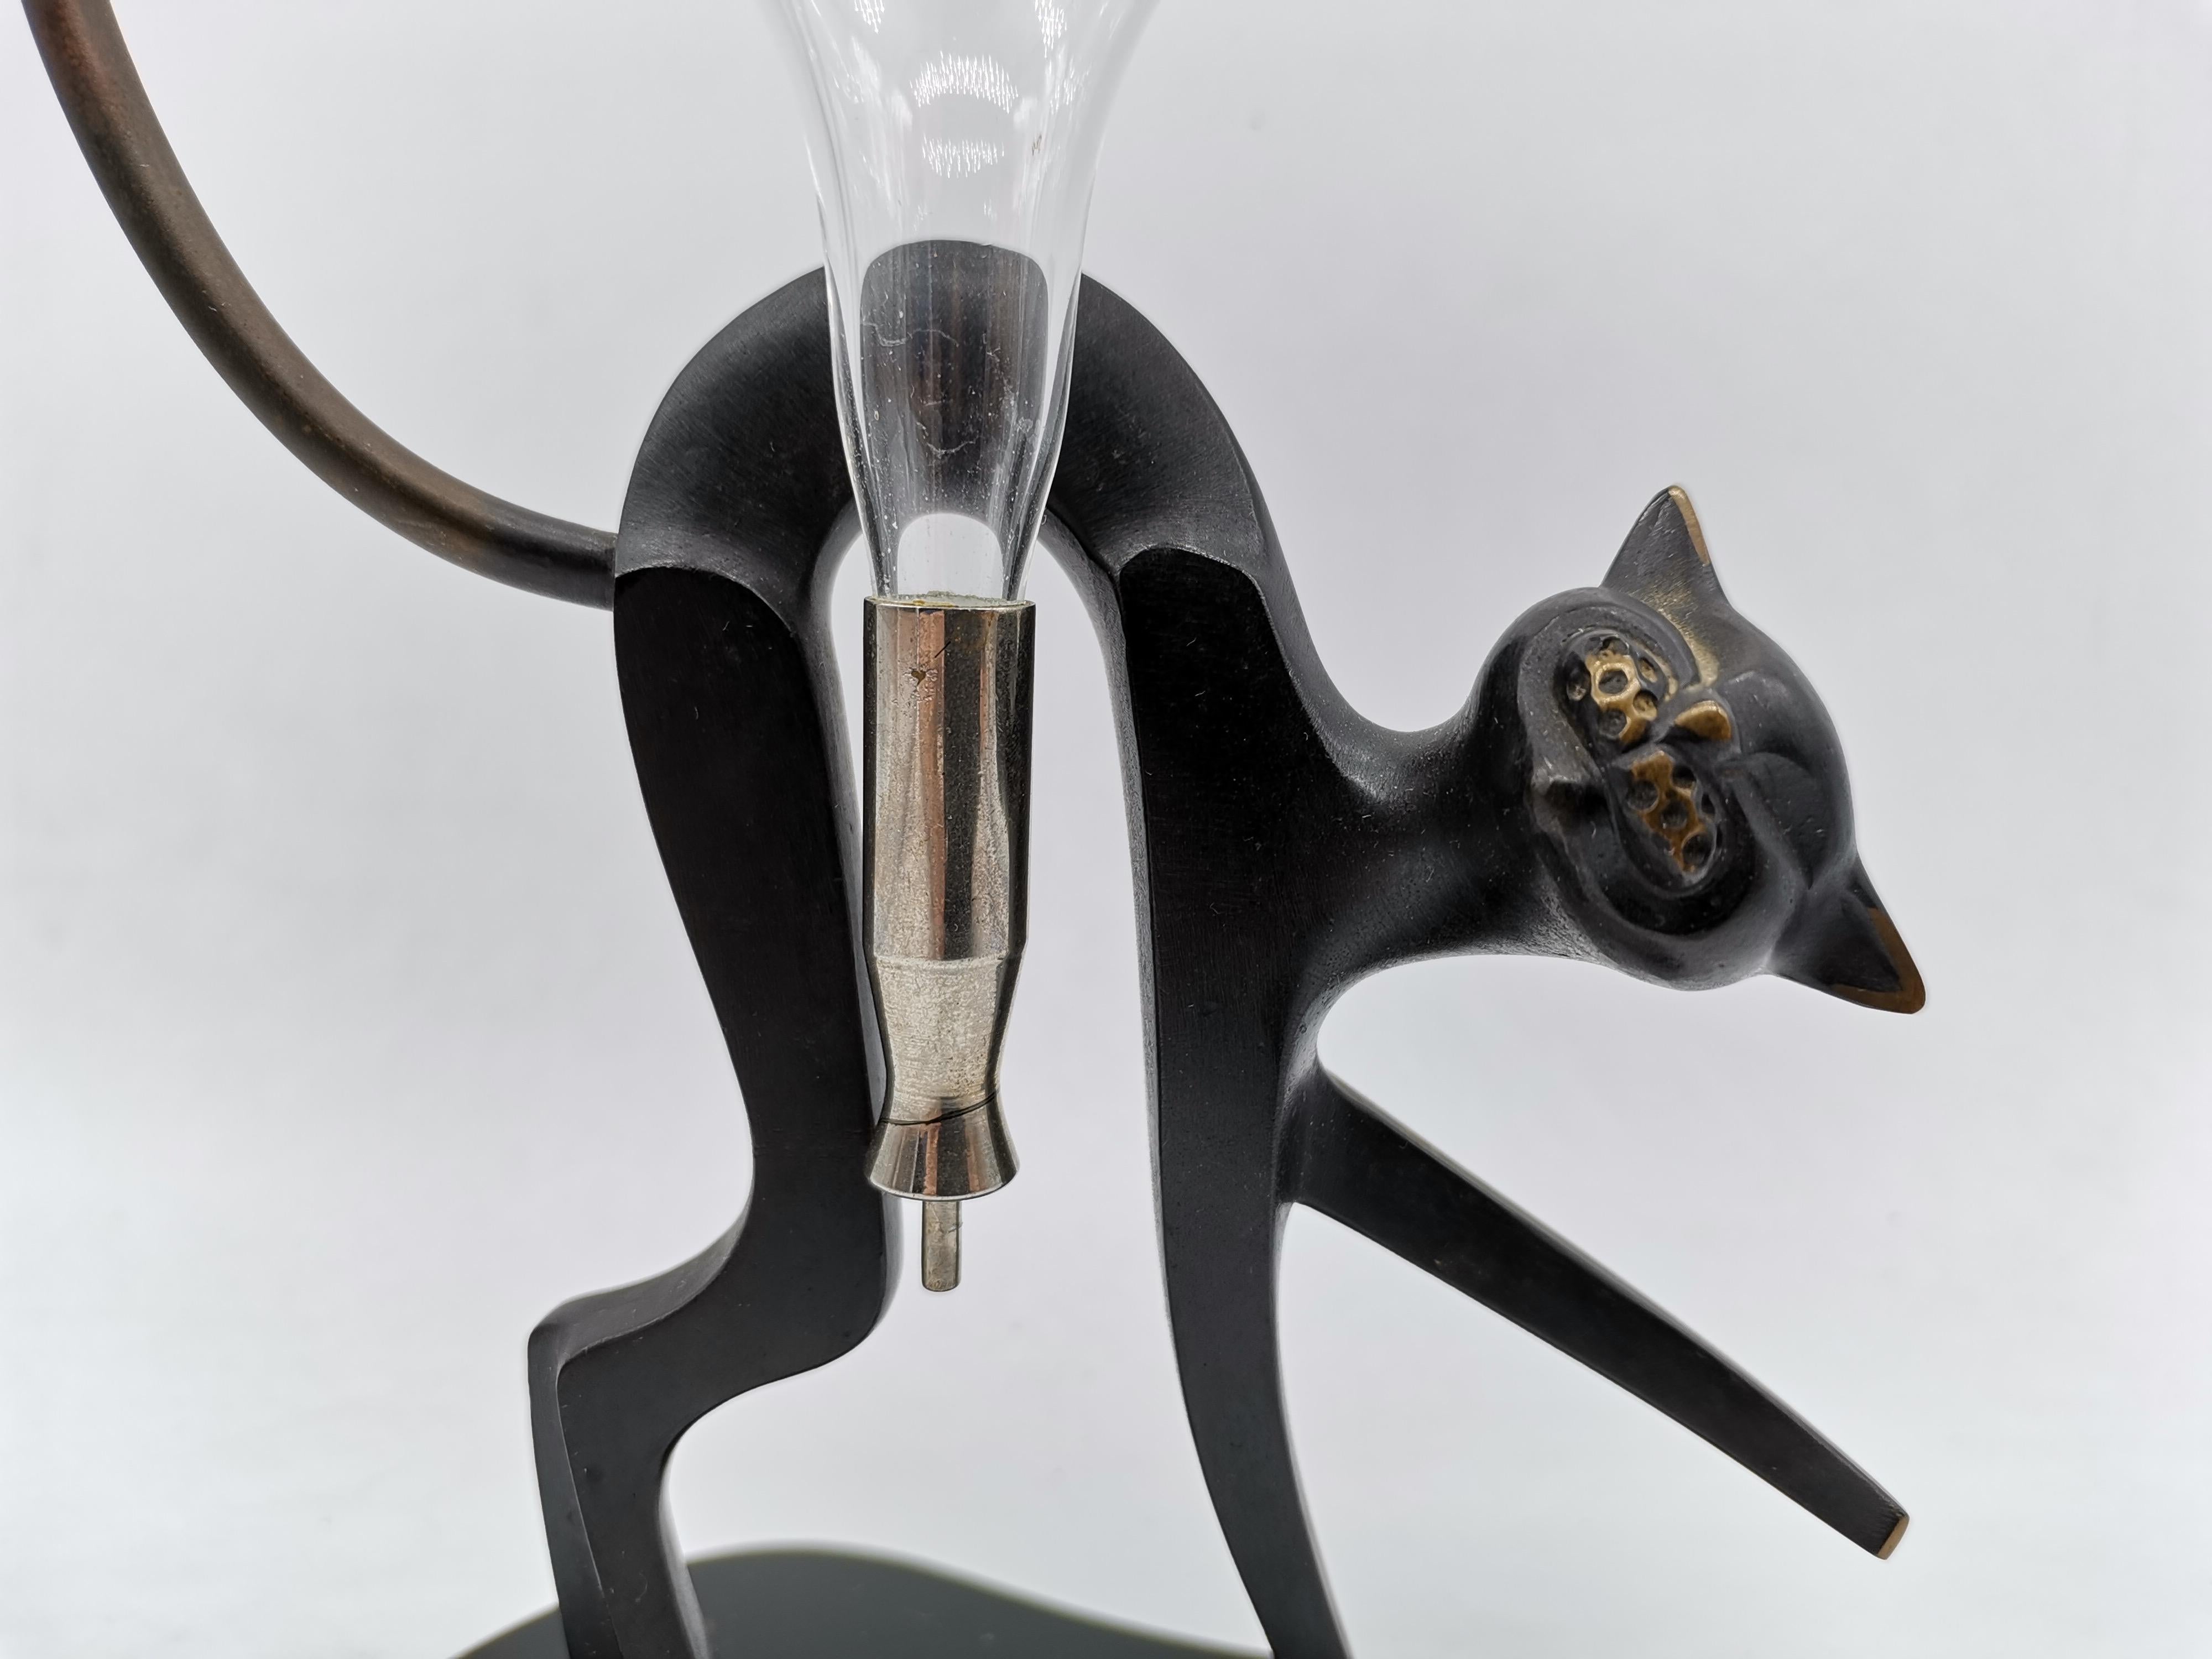 A holde for liqour or oils by Richard Rohac in cat shape.